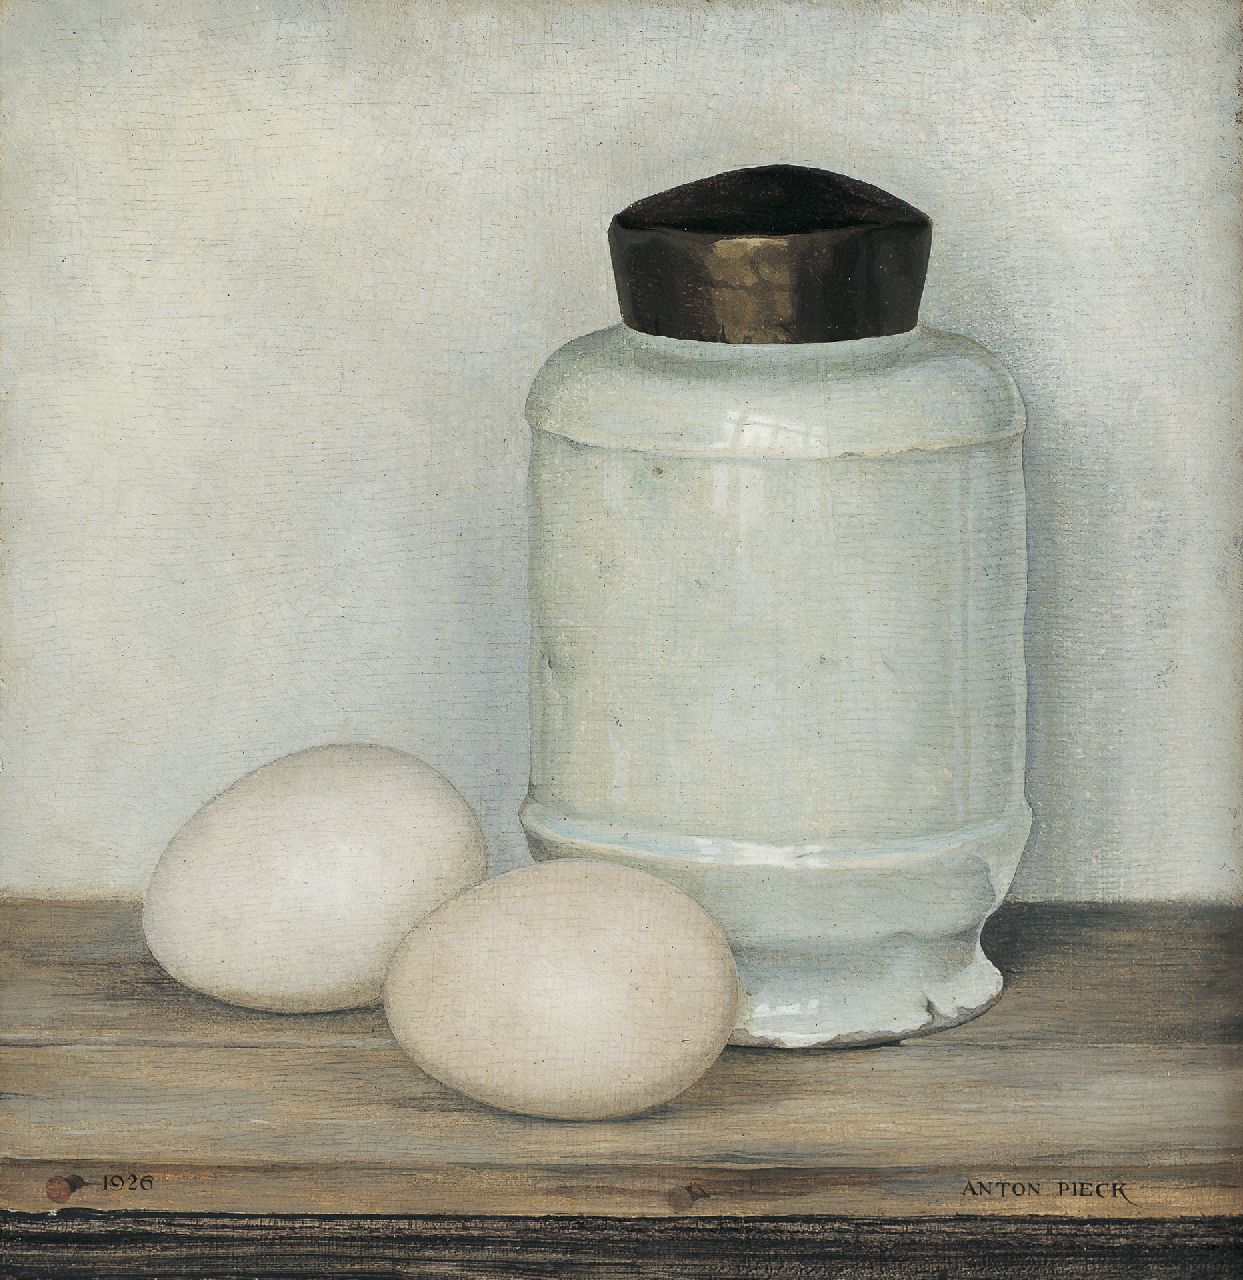 Pieck A.F.  | 'Anton' Franciscus Pieck, A white pot and two eggs, oil on panel 20.5 x 20.0 cm, signed l.r. and dated 1926